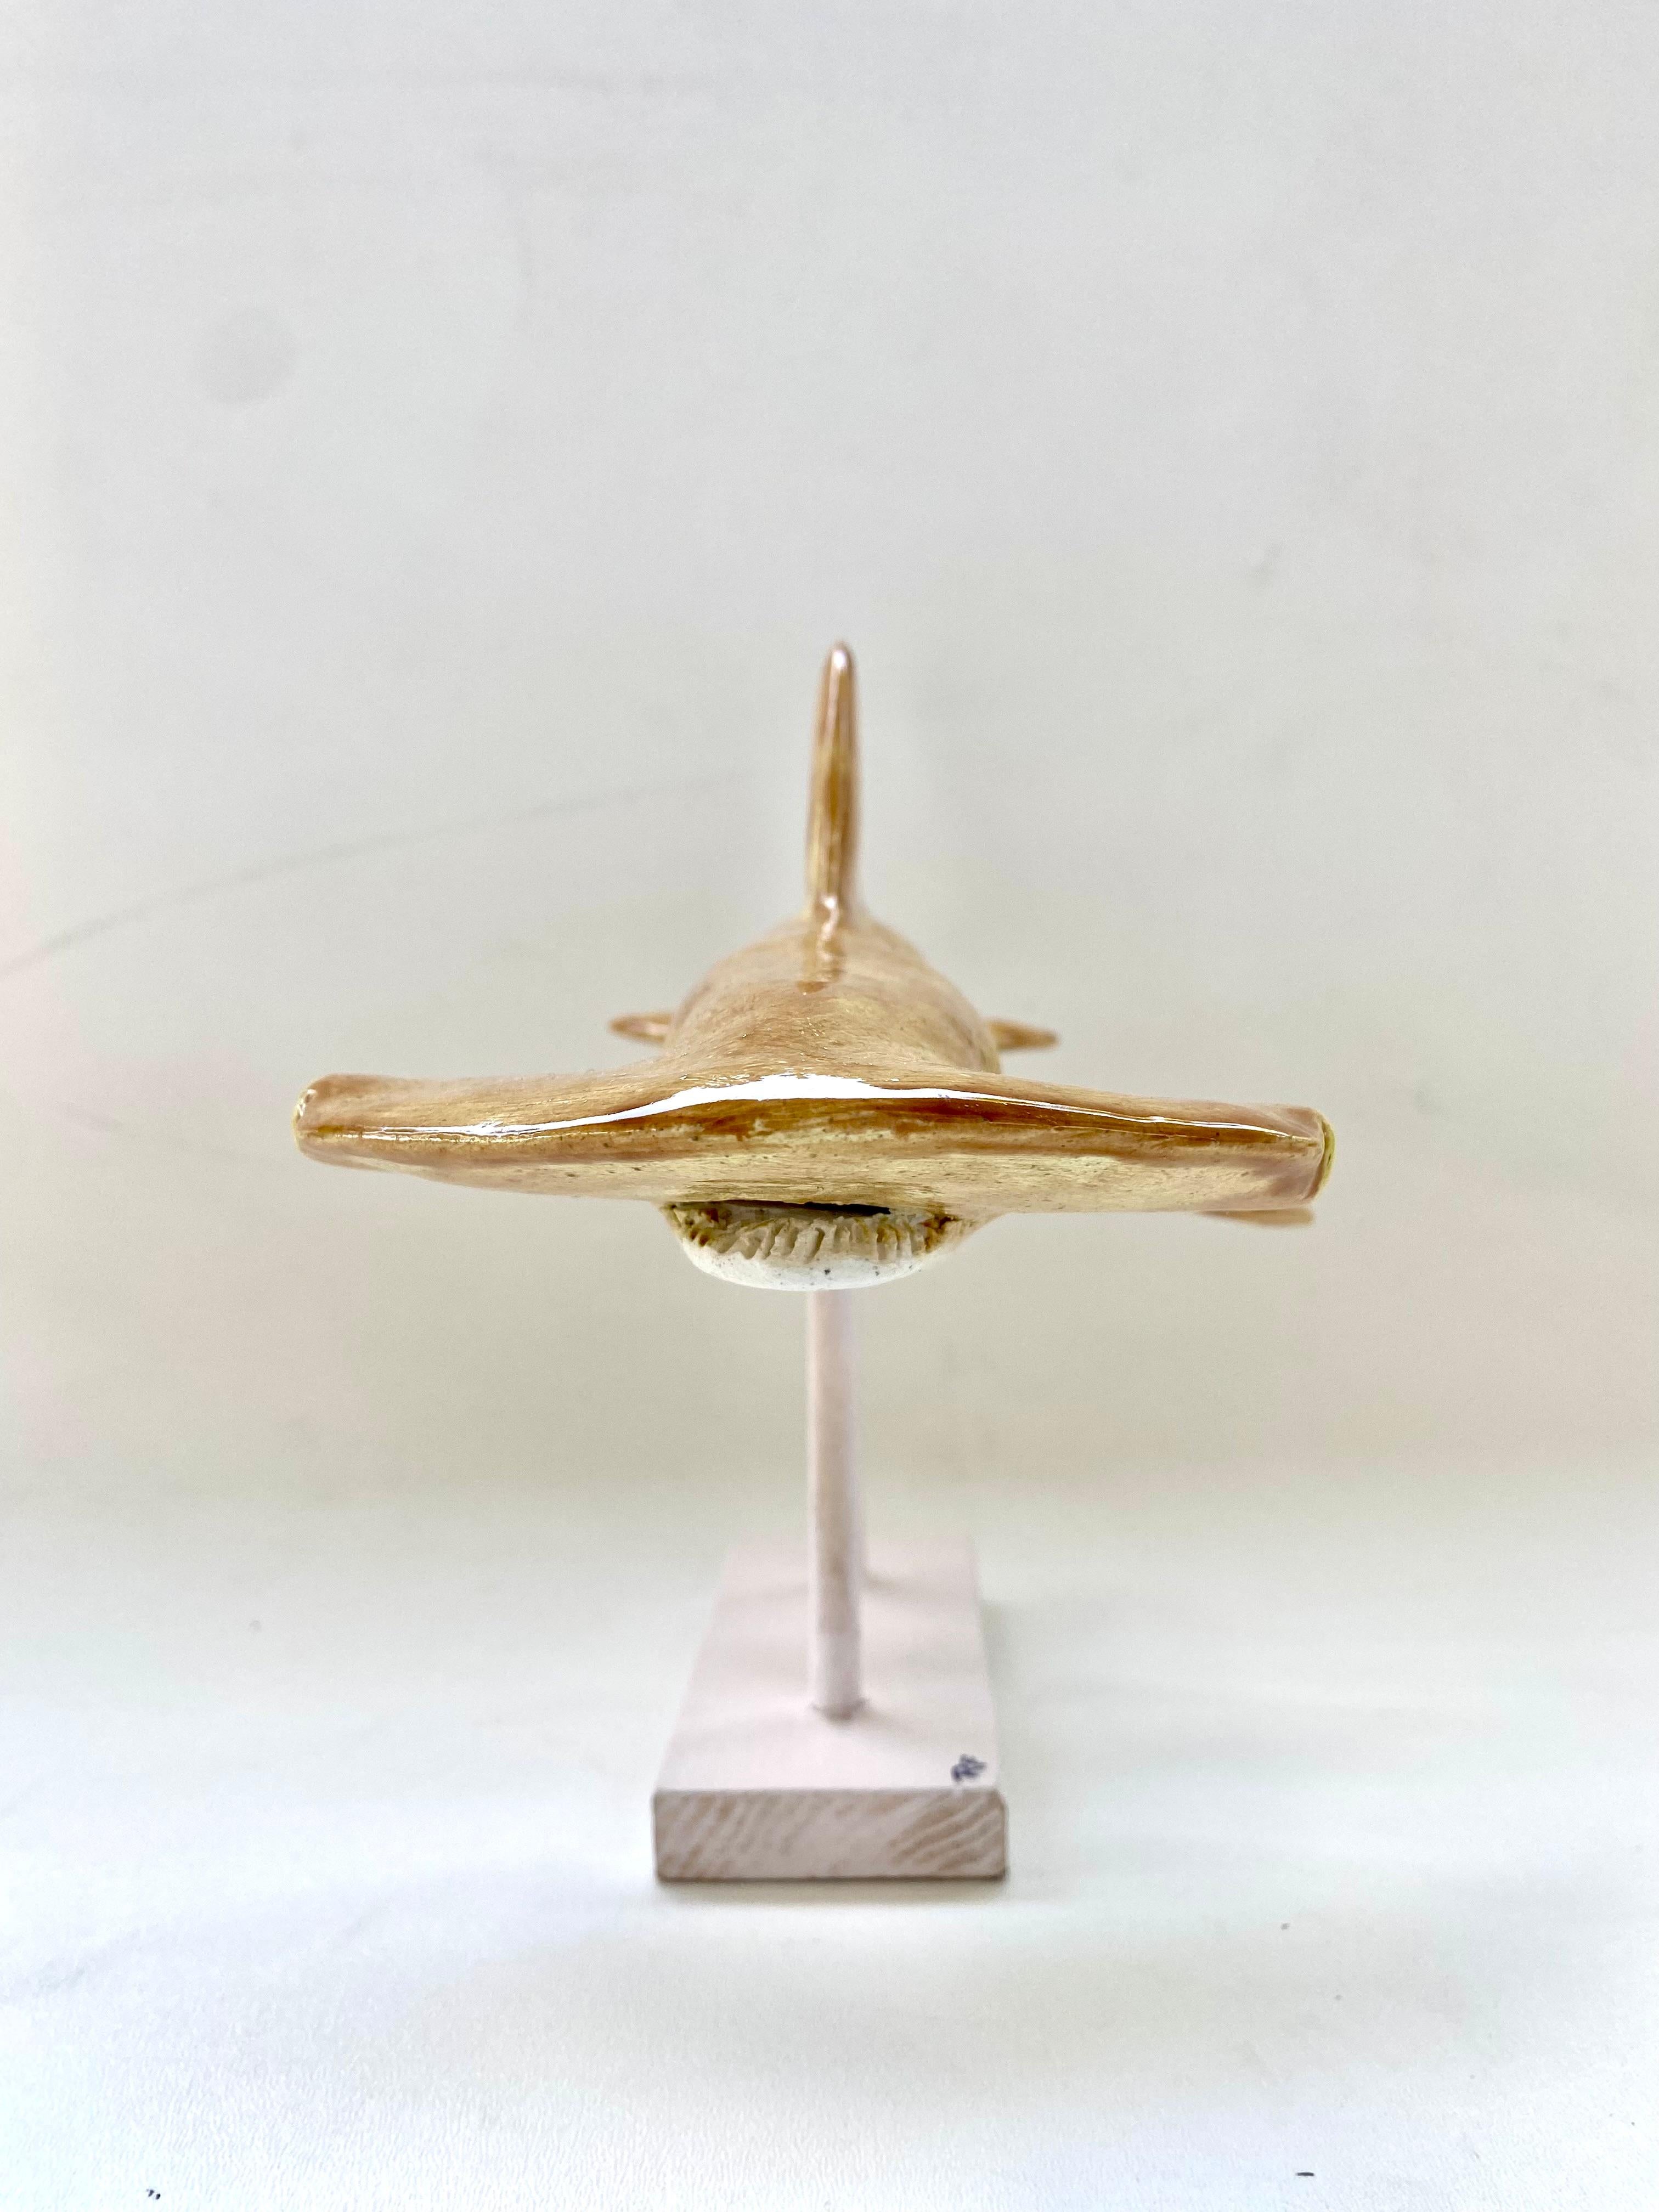 Contemporary Hand-Made Sculptural Glazed Ceramic Hammerhead Shark on Stand by Rexx Fischer  For Sale